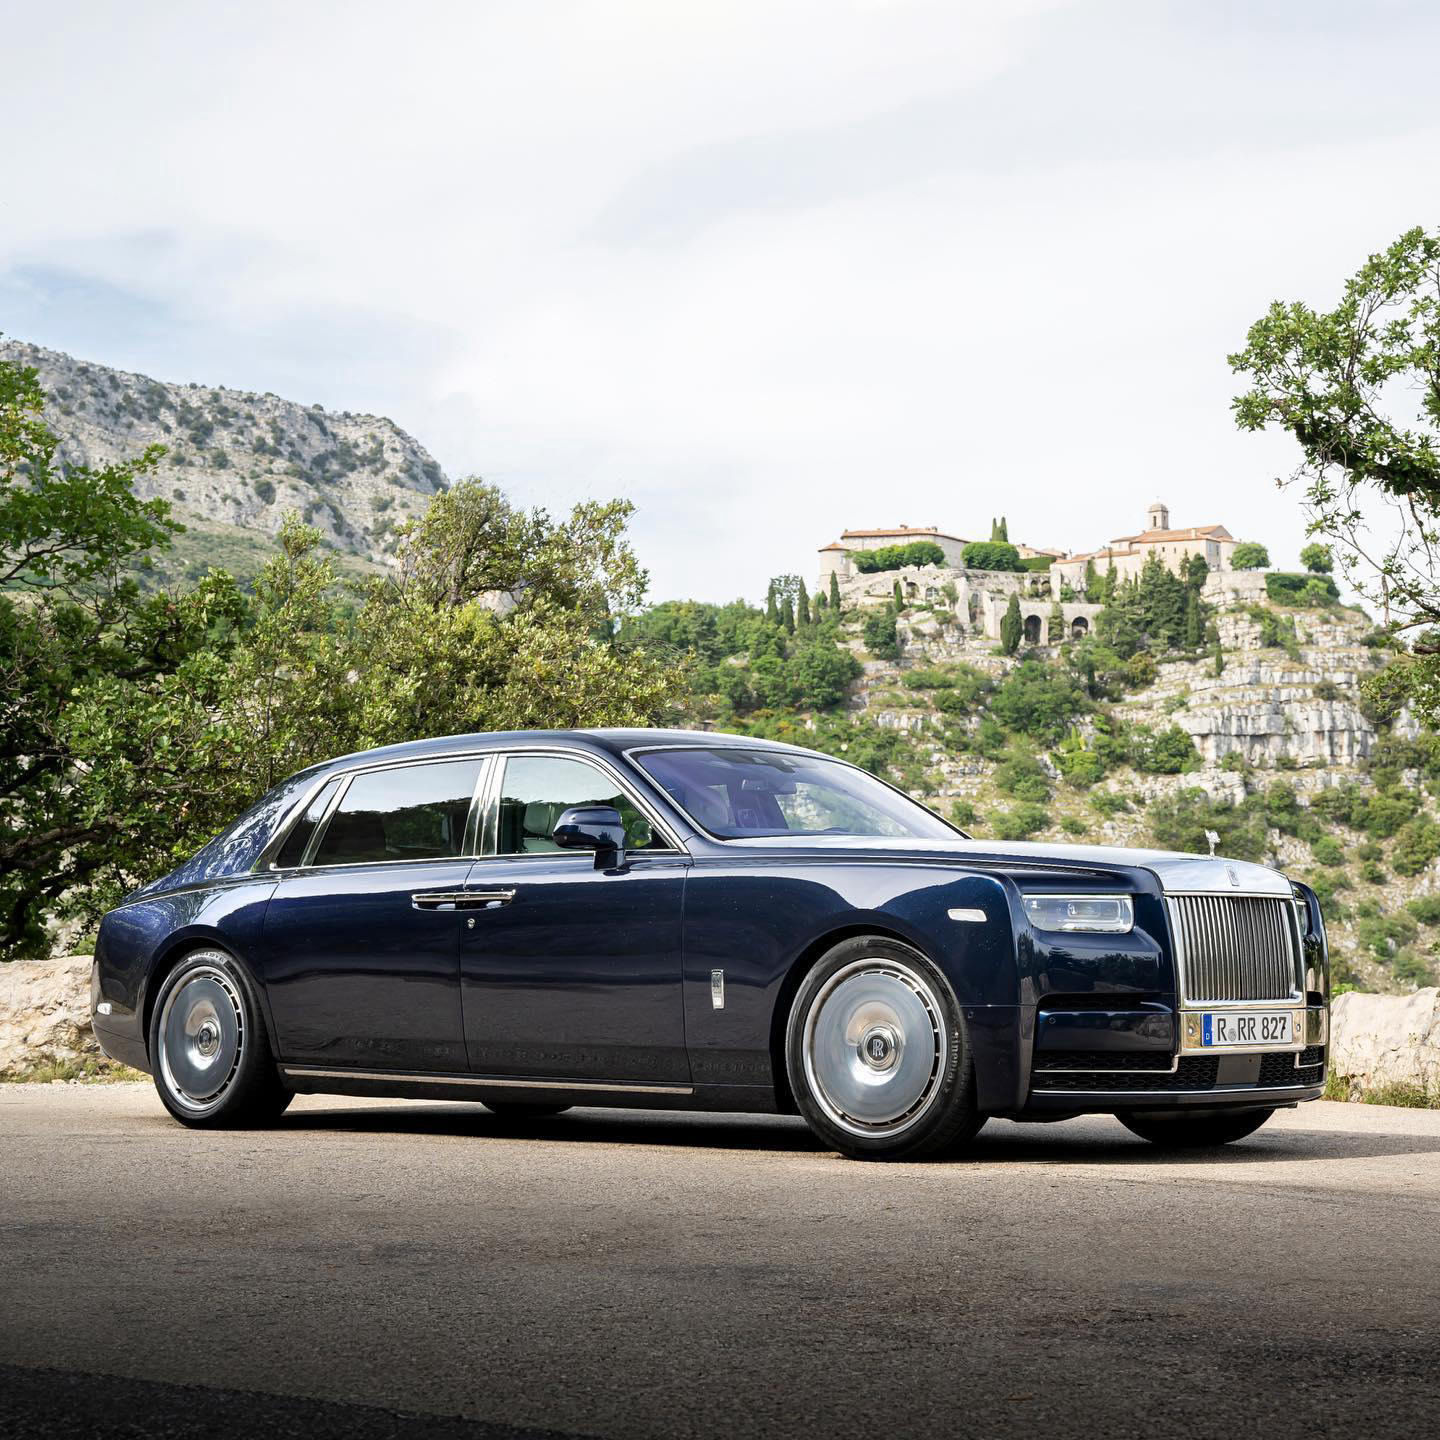 image  1 Rolls-Royce Motor Cars - Refined Disc Wheels encapsulate the thrill and grace of flight on land, ble